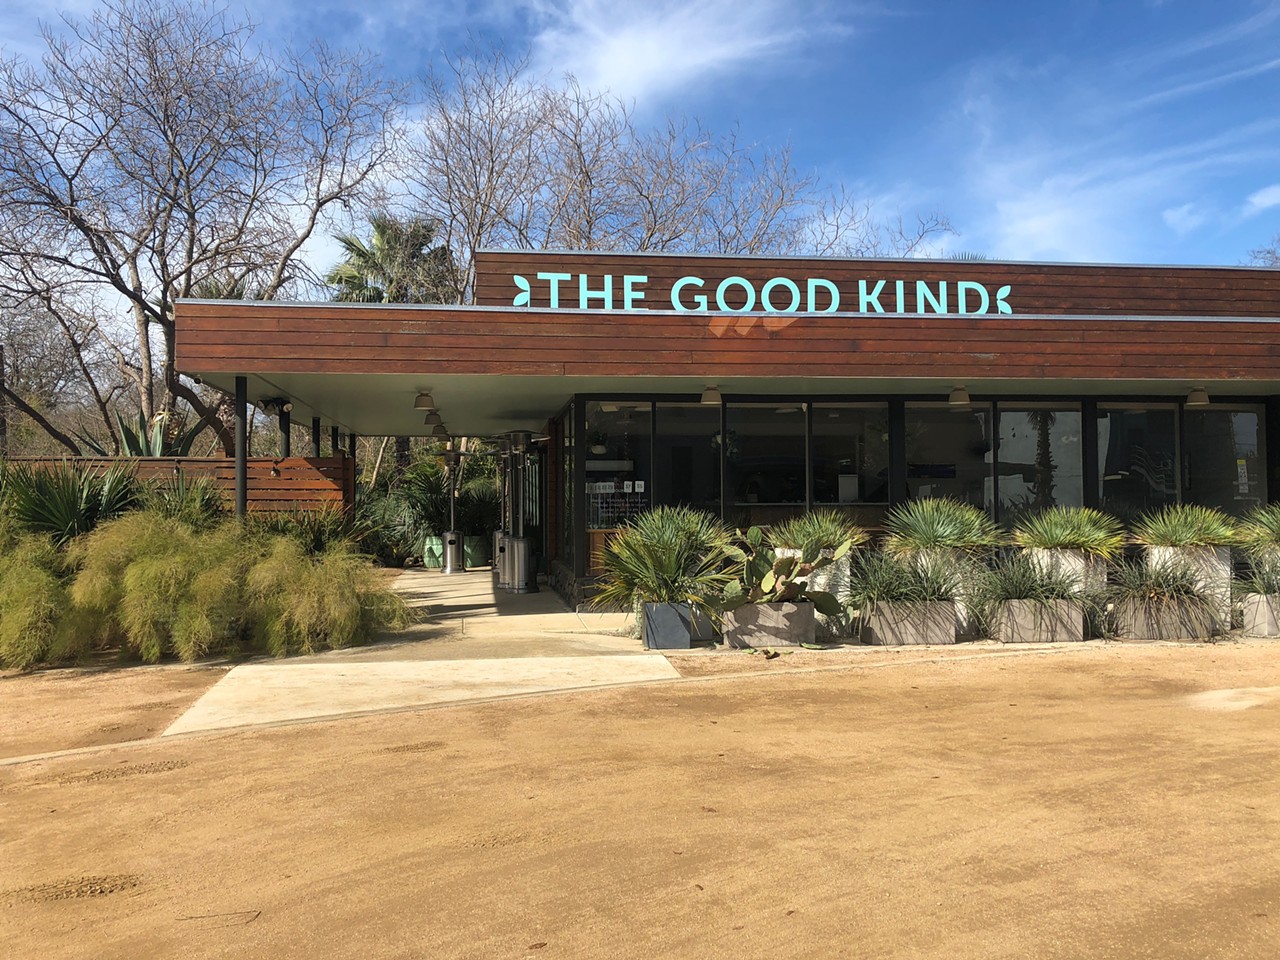 The Good Kind Southtown will celebrate its grand opening on Saturday, Feb. 23, 2019.